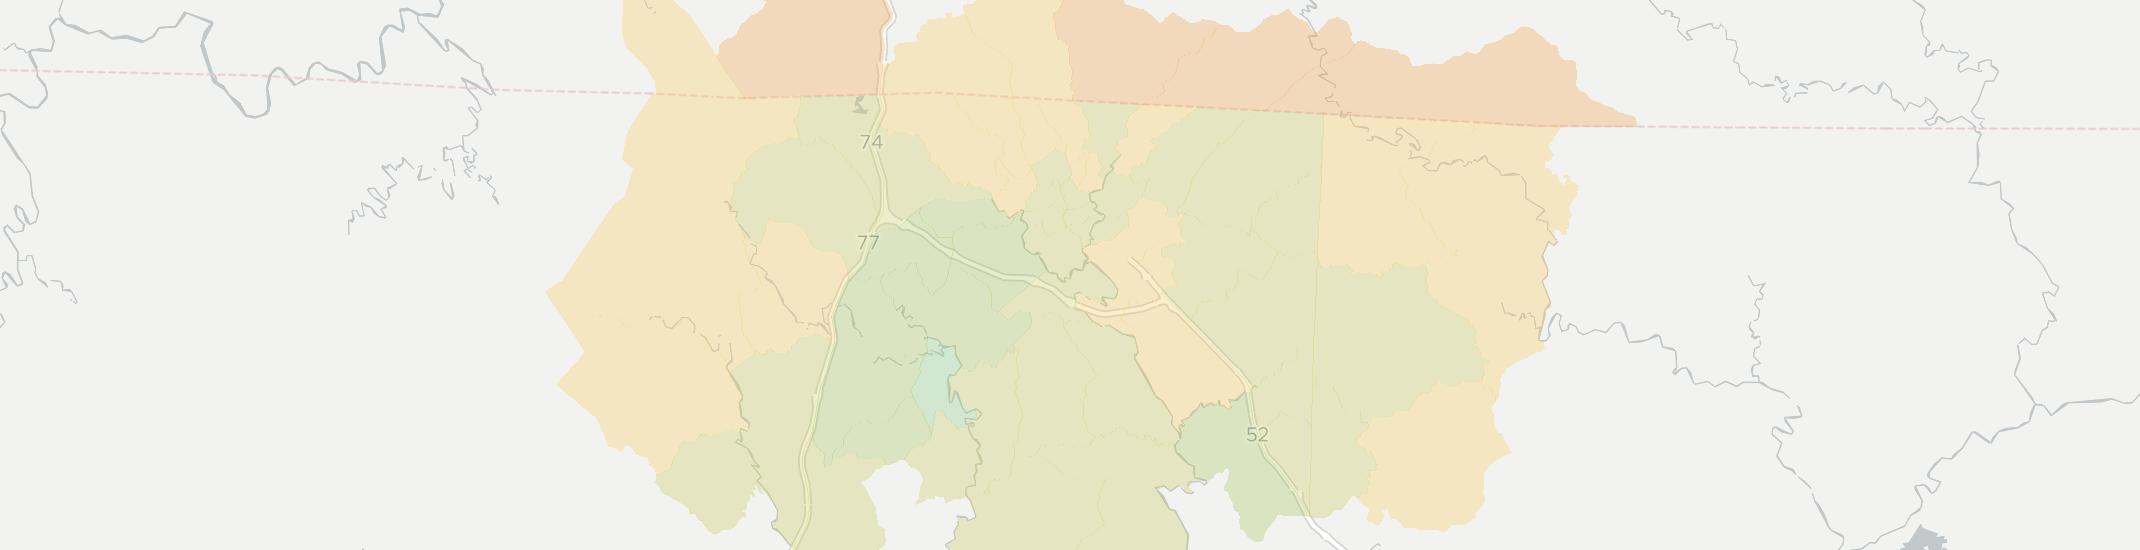 Mount Airy Internet Competition Map. Click for interactive map.